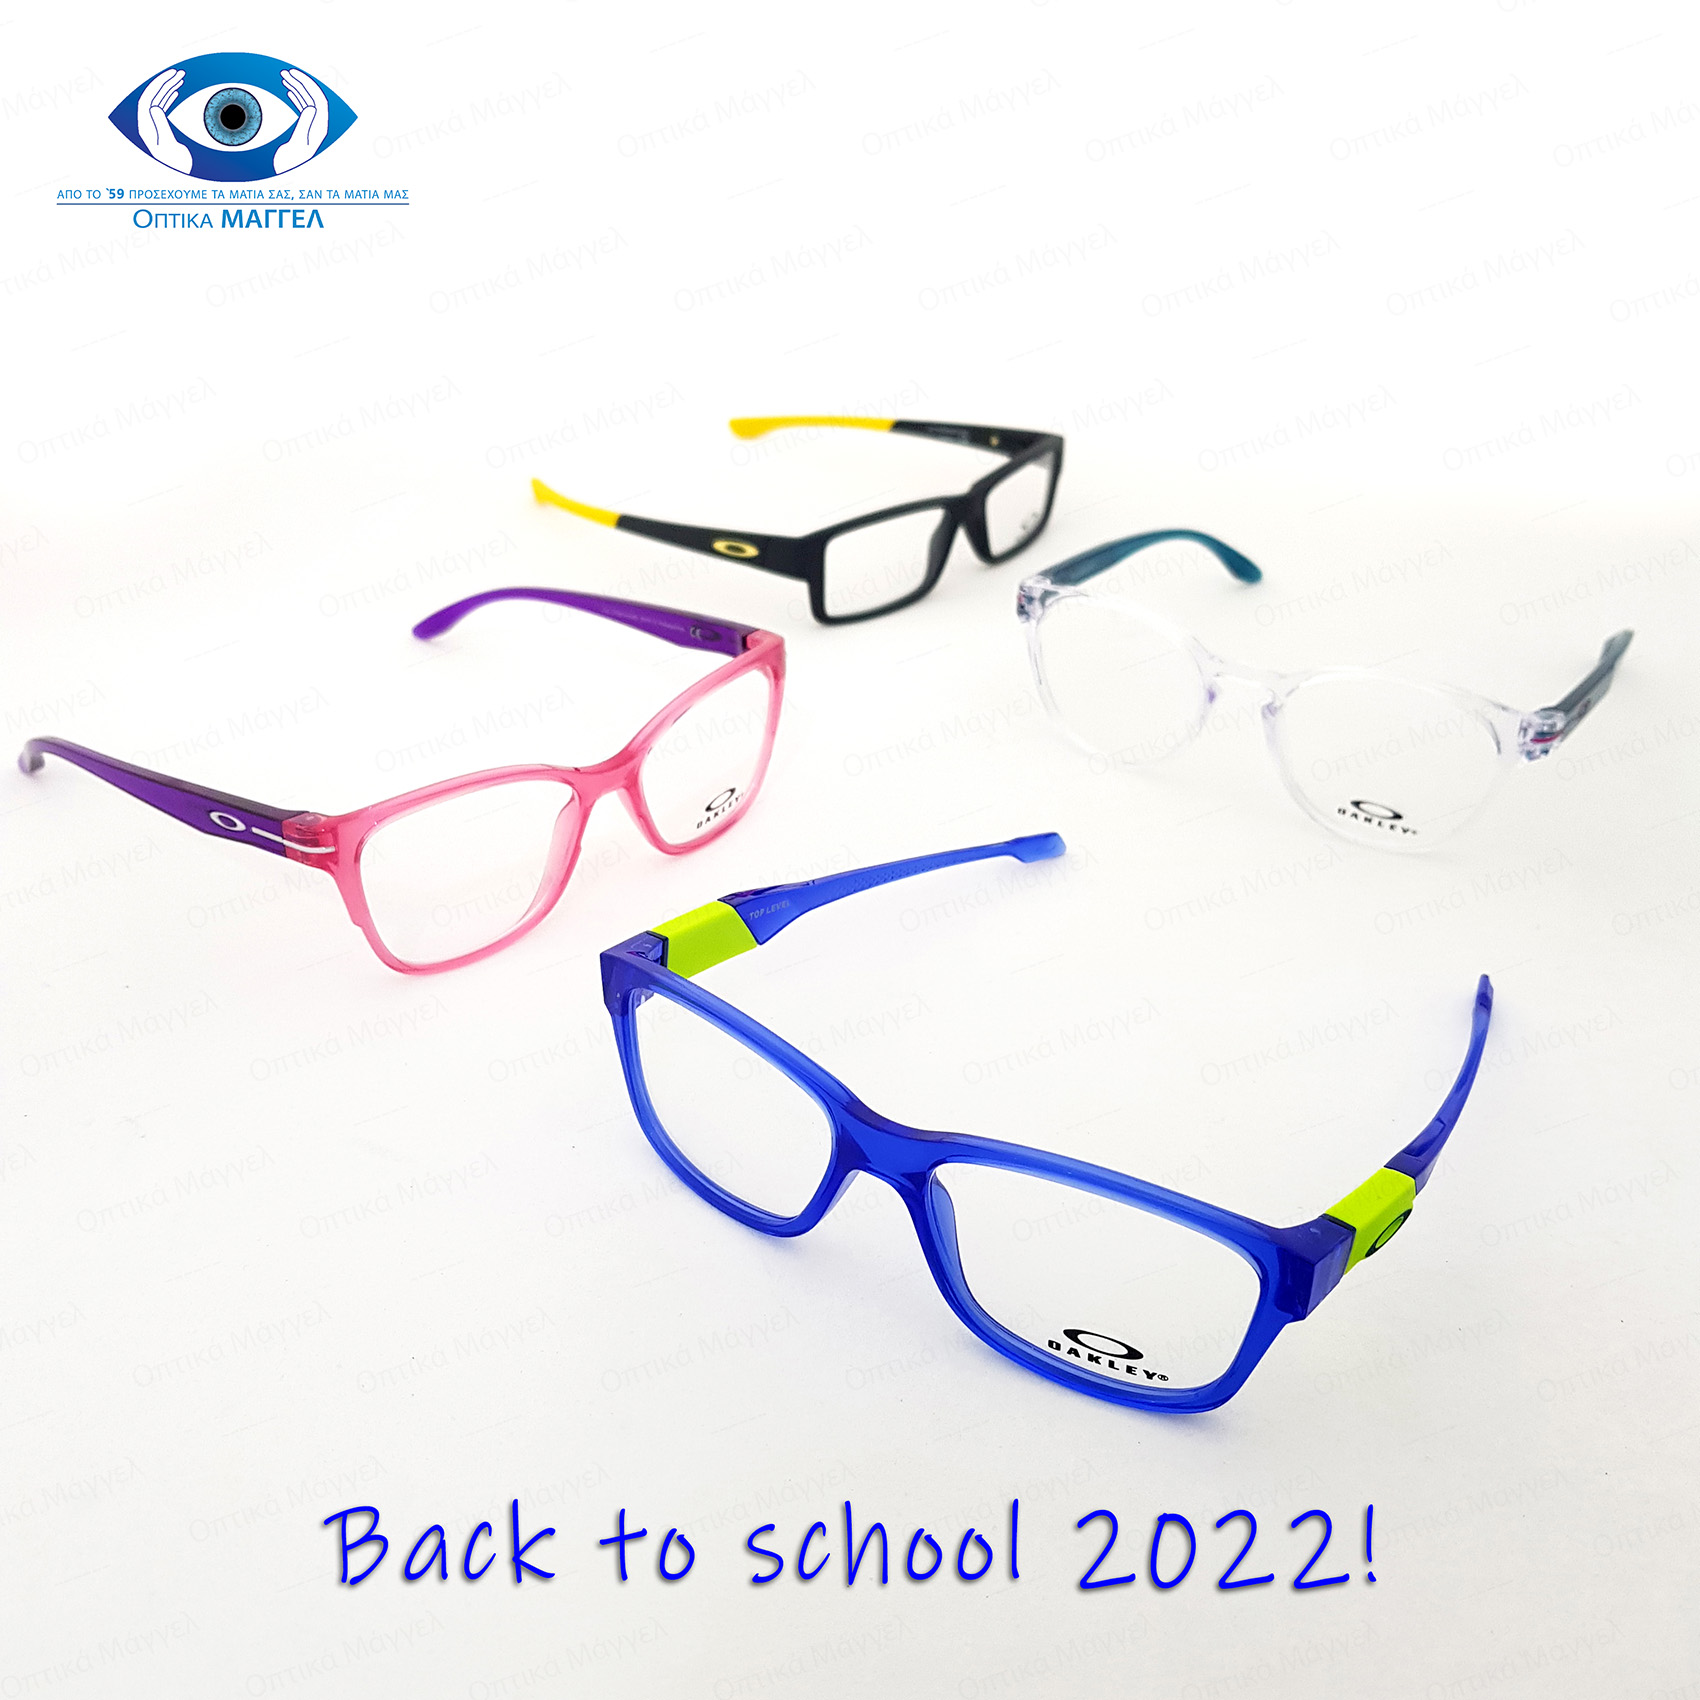 Back to school 2022!